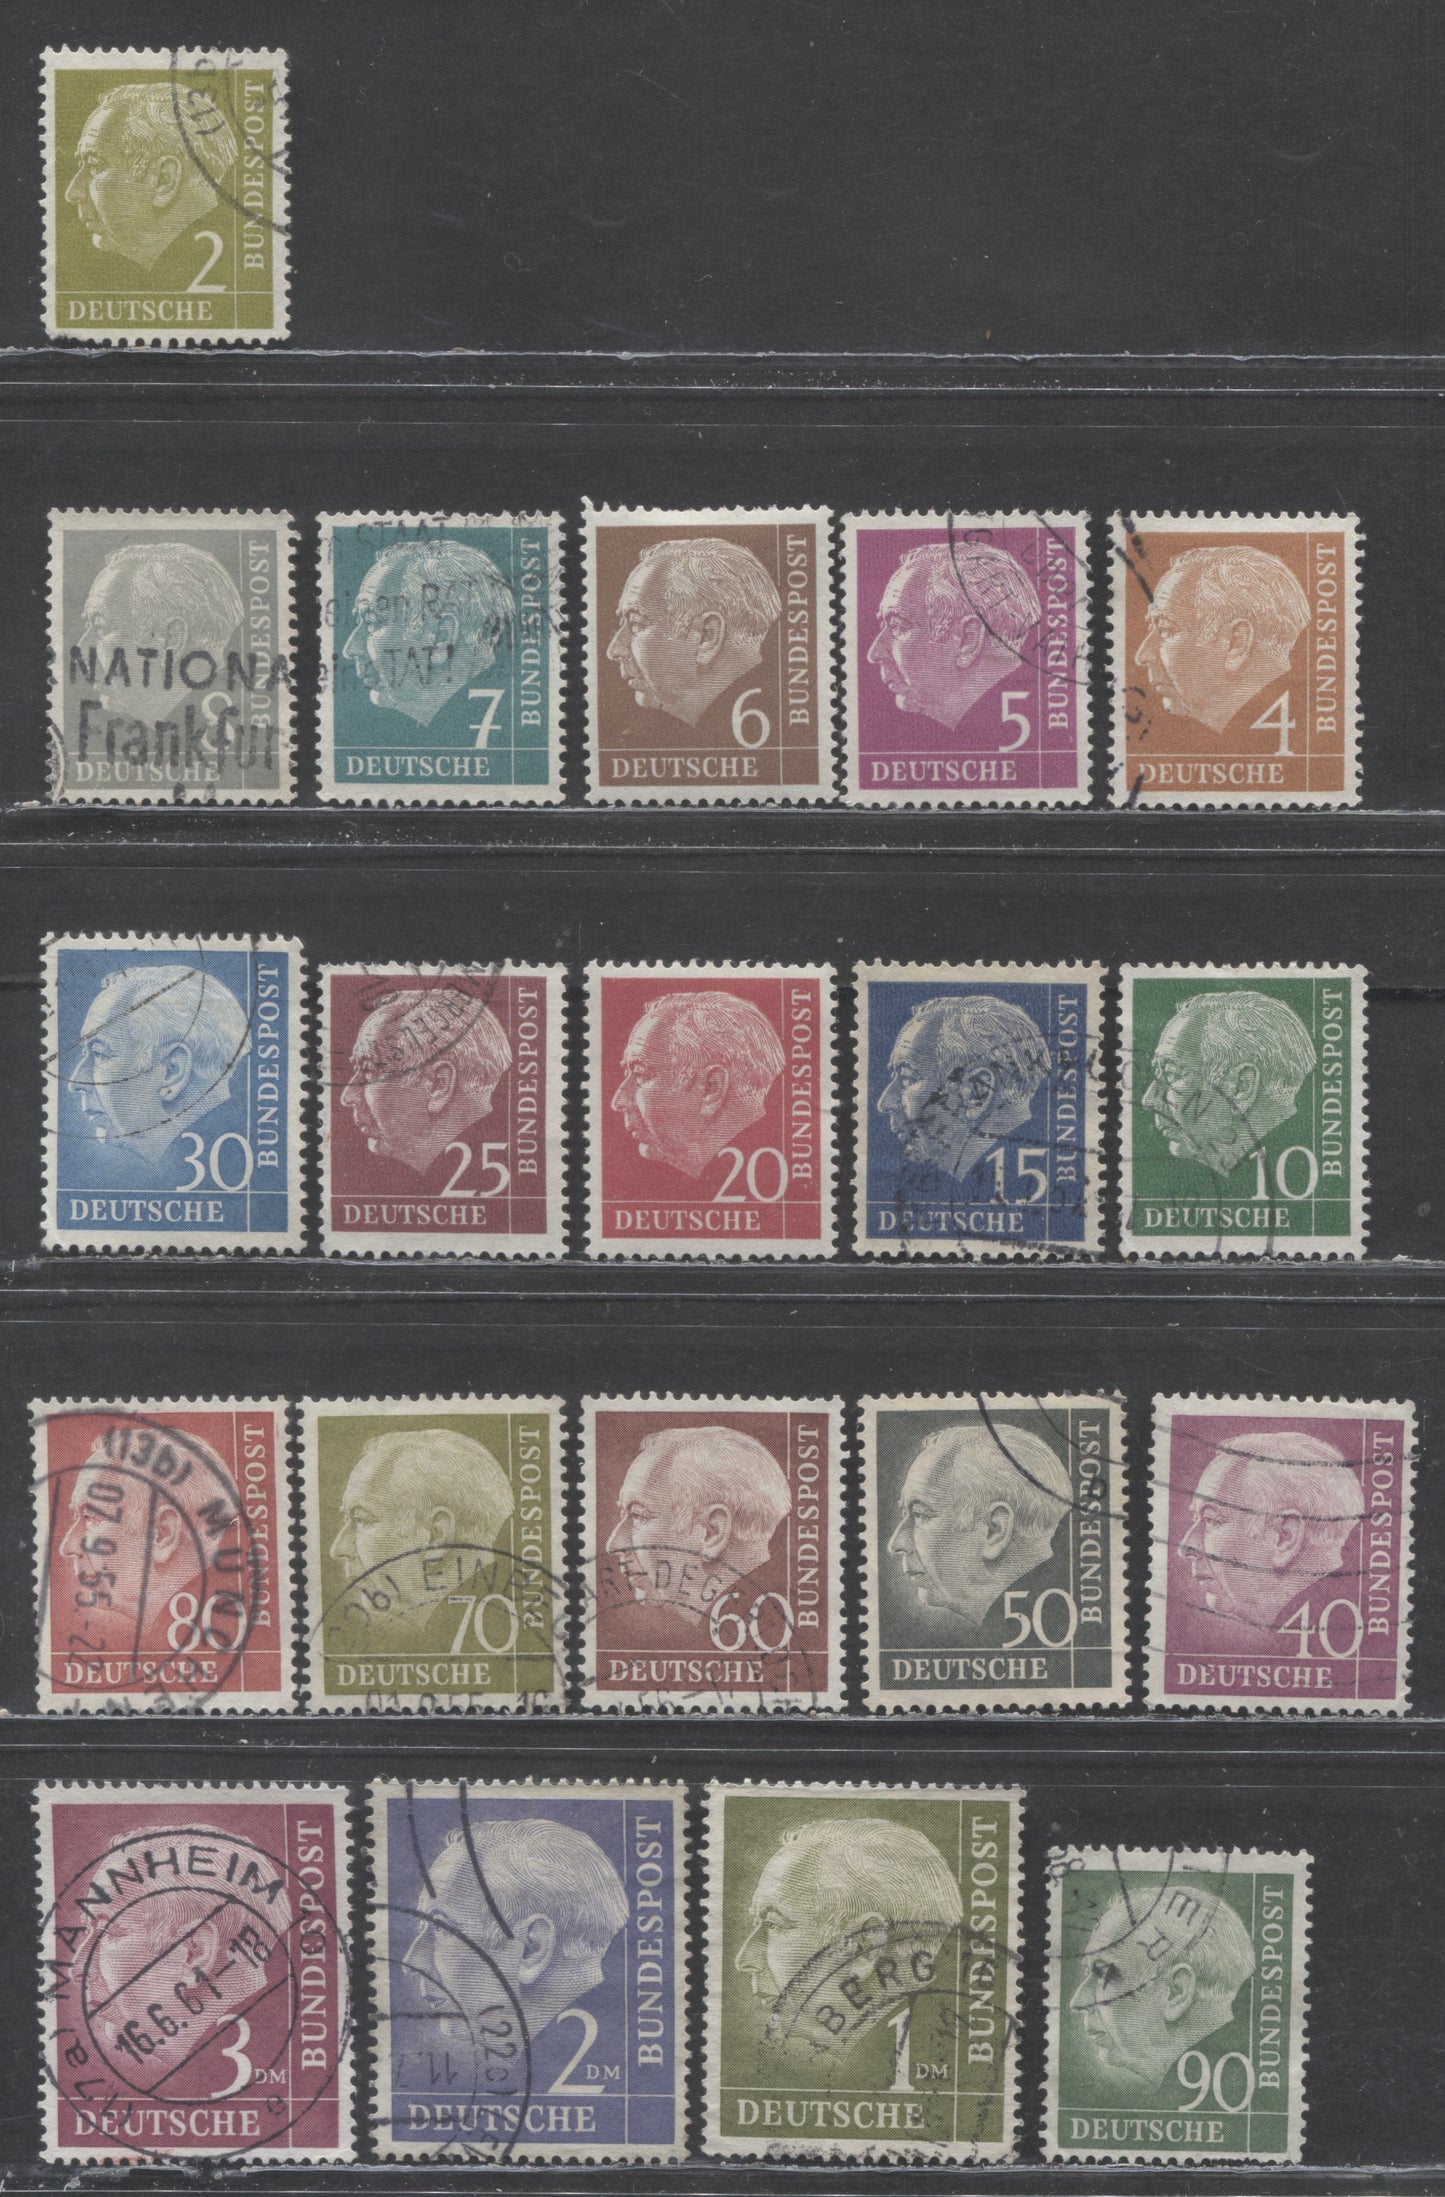 Lot 118 Germany SC#702-721 1954-1960 Heuss Definitives, 20 Fine/Very Fine Used Singles, Click on Listing to See ALL Pictures, 2017 Scott Cat. $20 USD